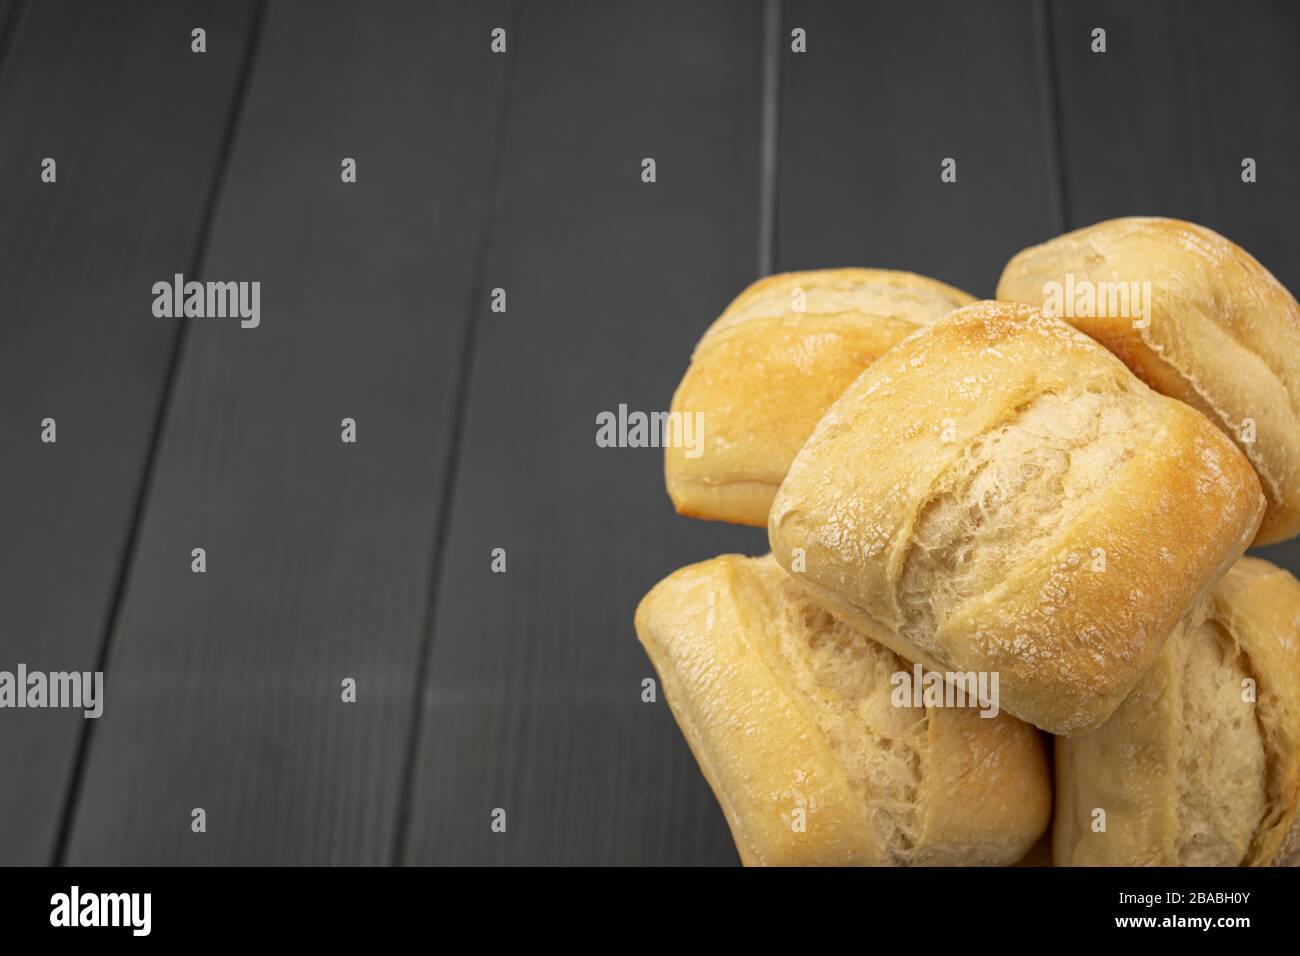 Heap of freshly baked and golden bread ready for consumption on gray wooden table with light traces of flour Stock Photo